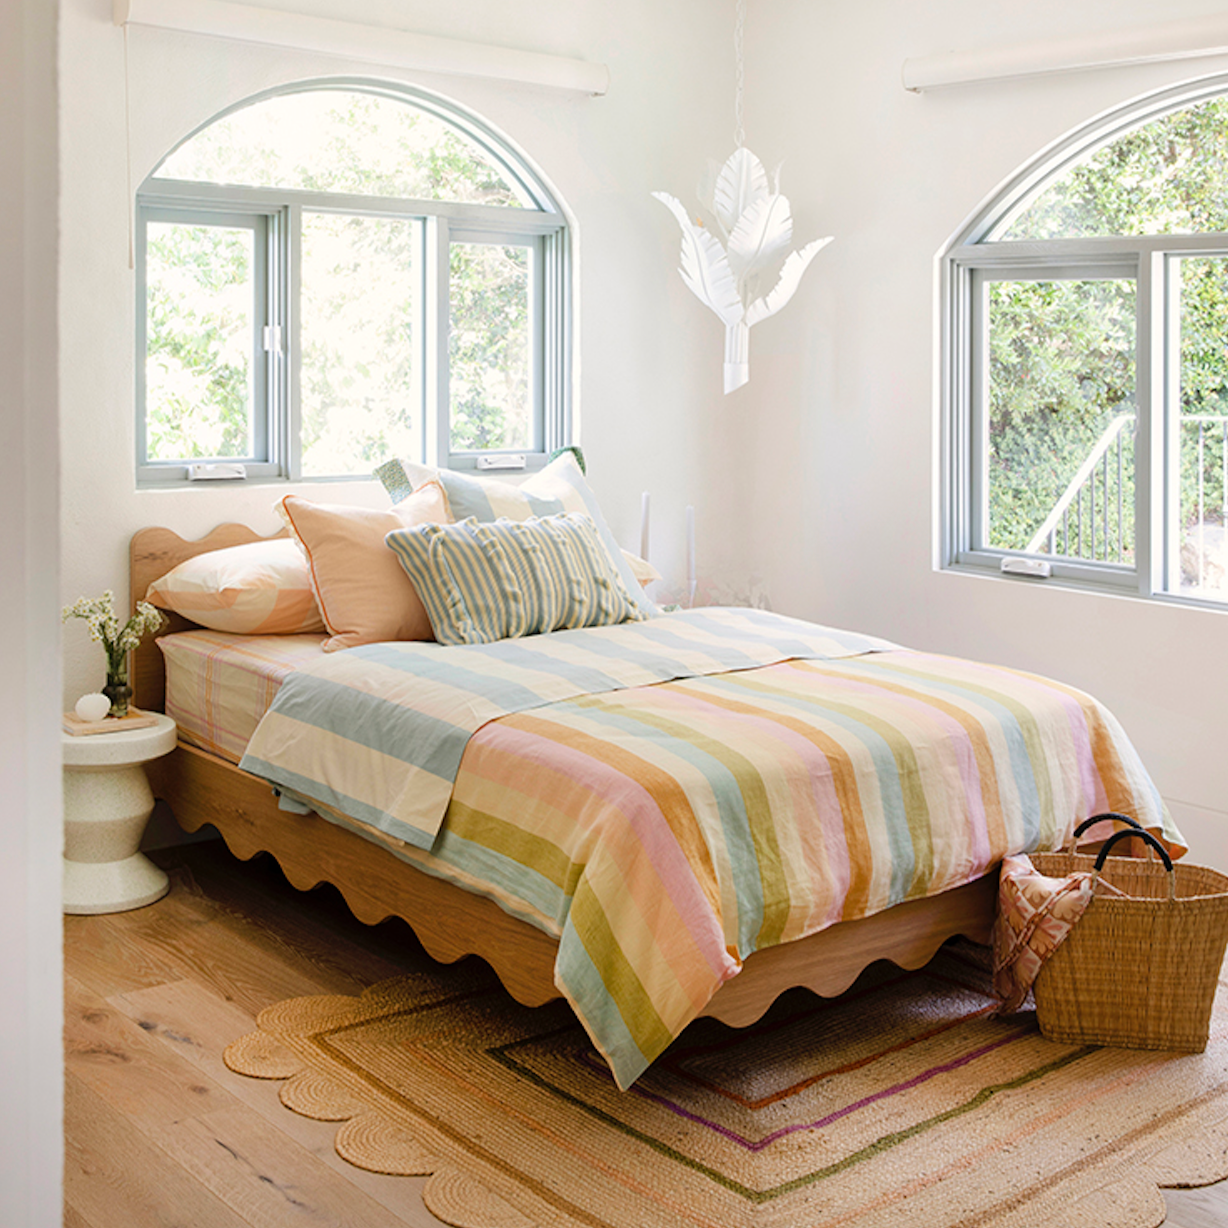 Floating girls bed in timber with curved rails and dressed in striped linen sheets